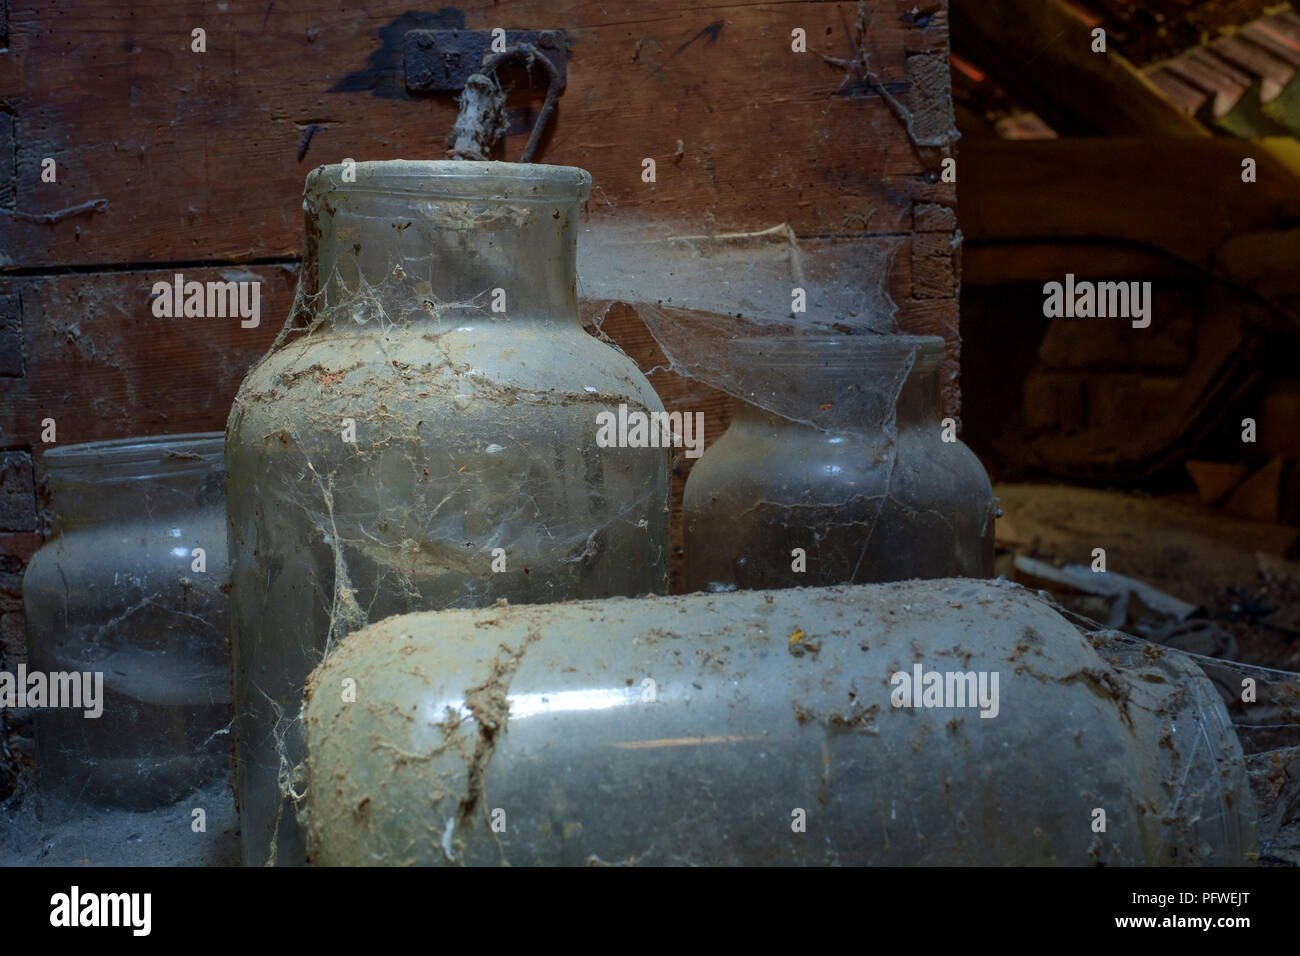 old glass jars and wooden box covered in dust and cobwebs laying undisturbed and forgotten in an old farmhouse attic zala county hungary Stock Photo